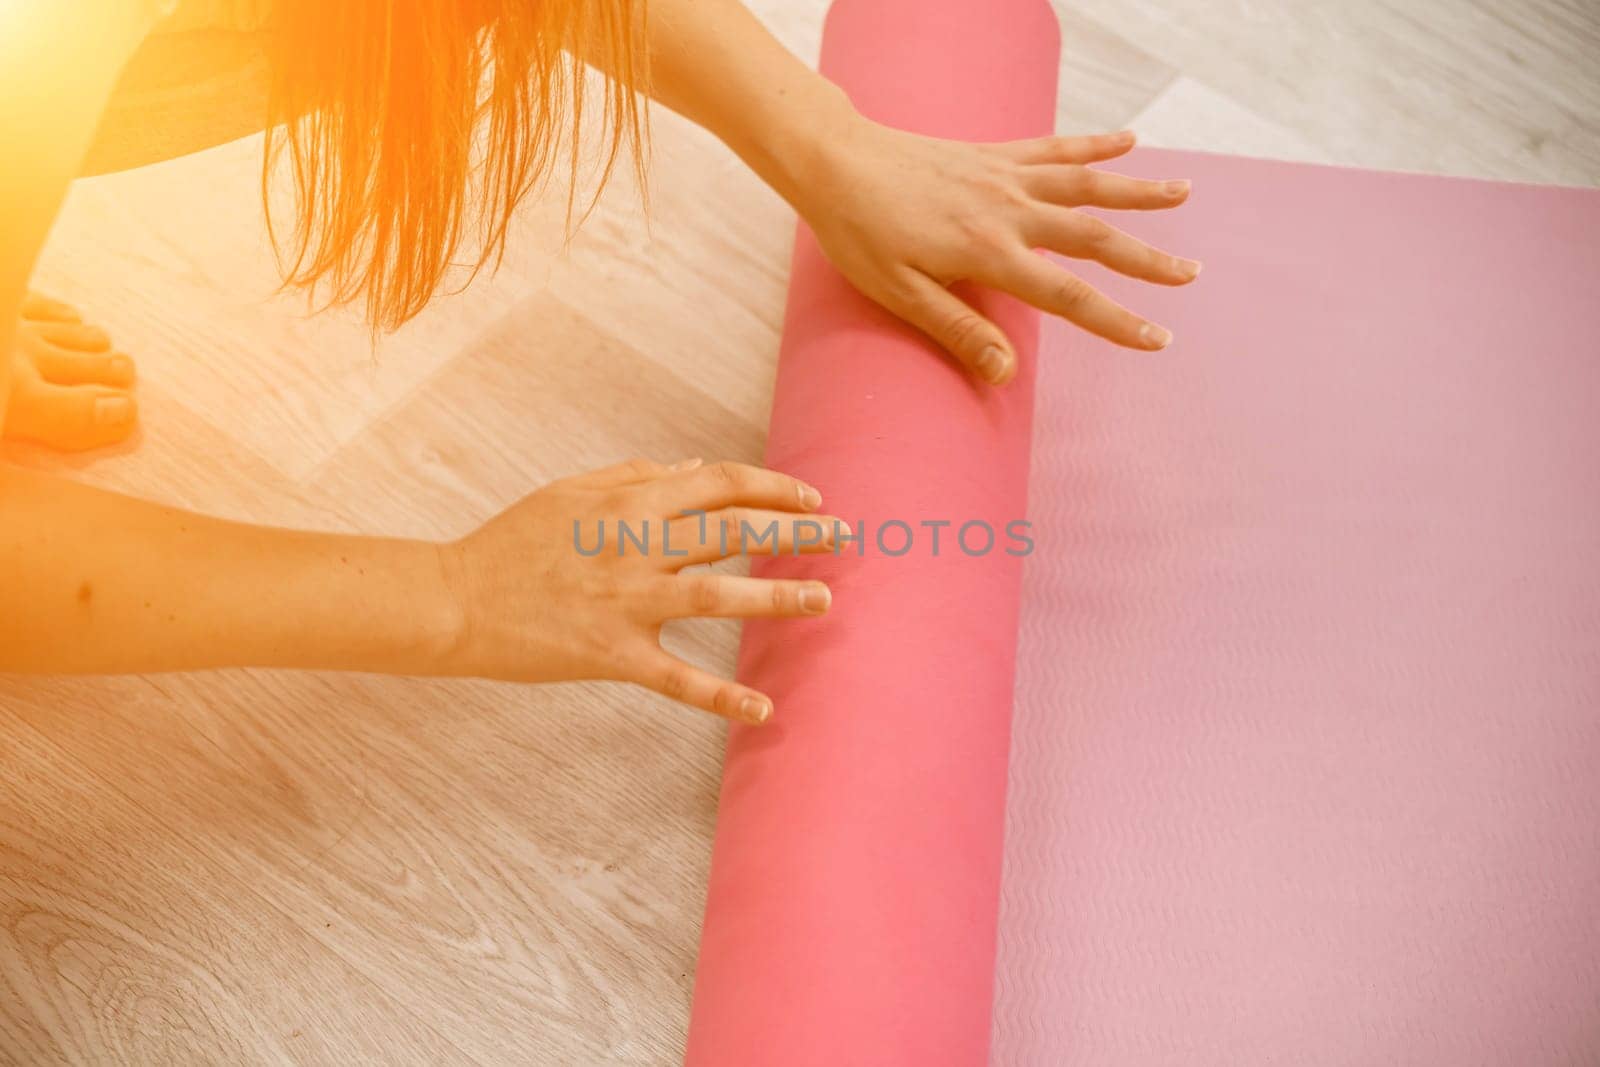 A young woman rolls a pink fitness or yoga mat before or after exercising, exercising at home in the living room or in a yoga studio. Healthy habits, keep fit, weight loss concept. Closeup photo by Matiunina